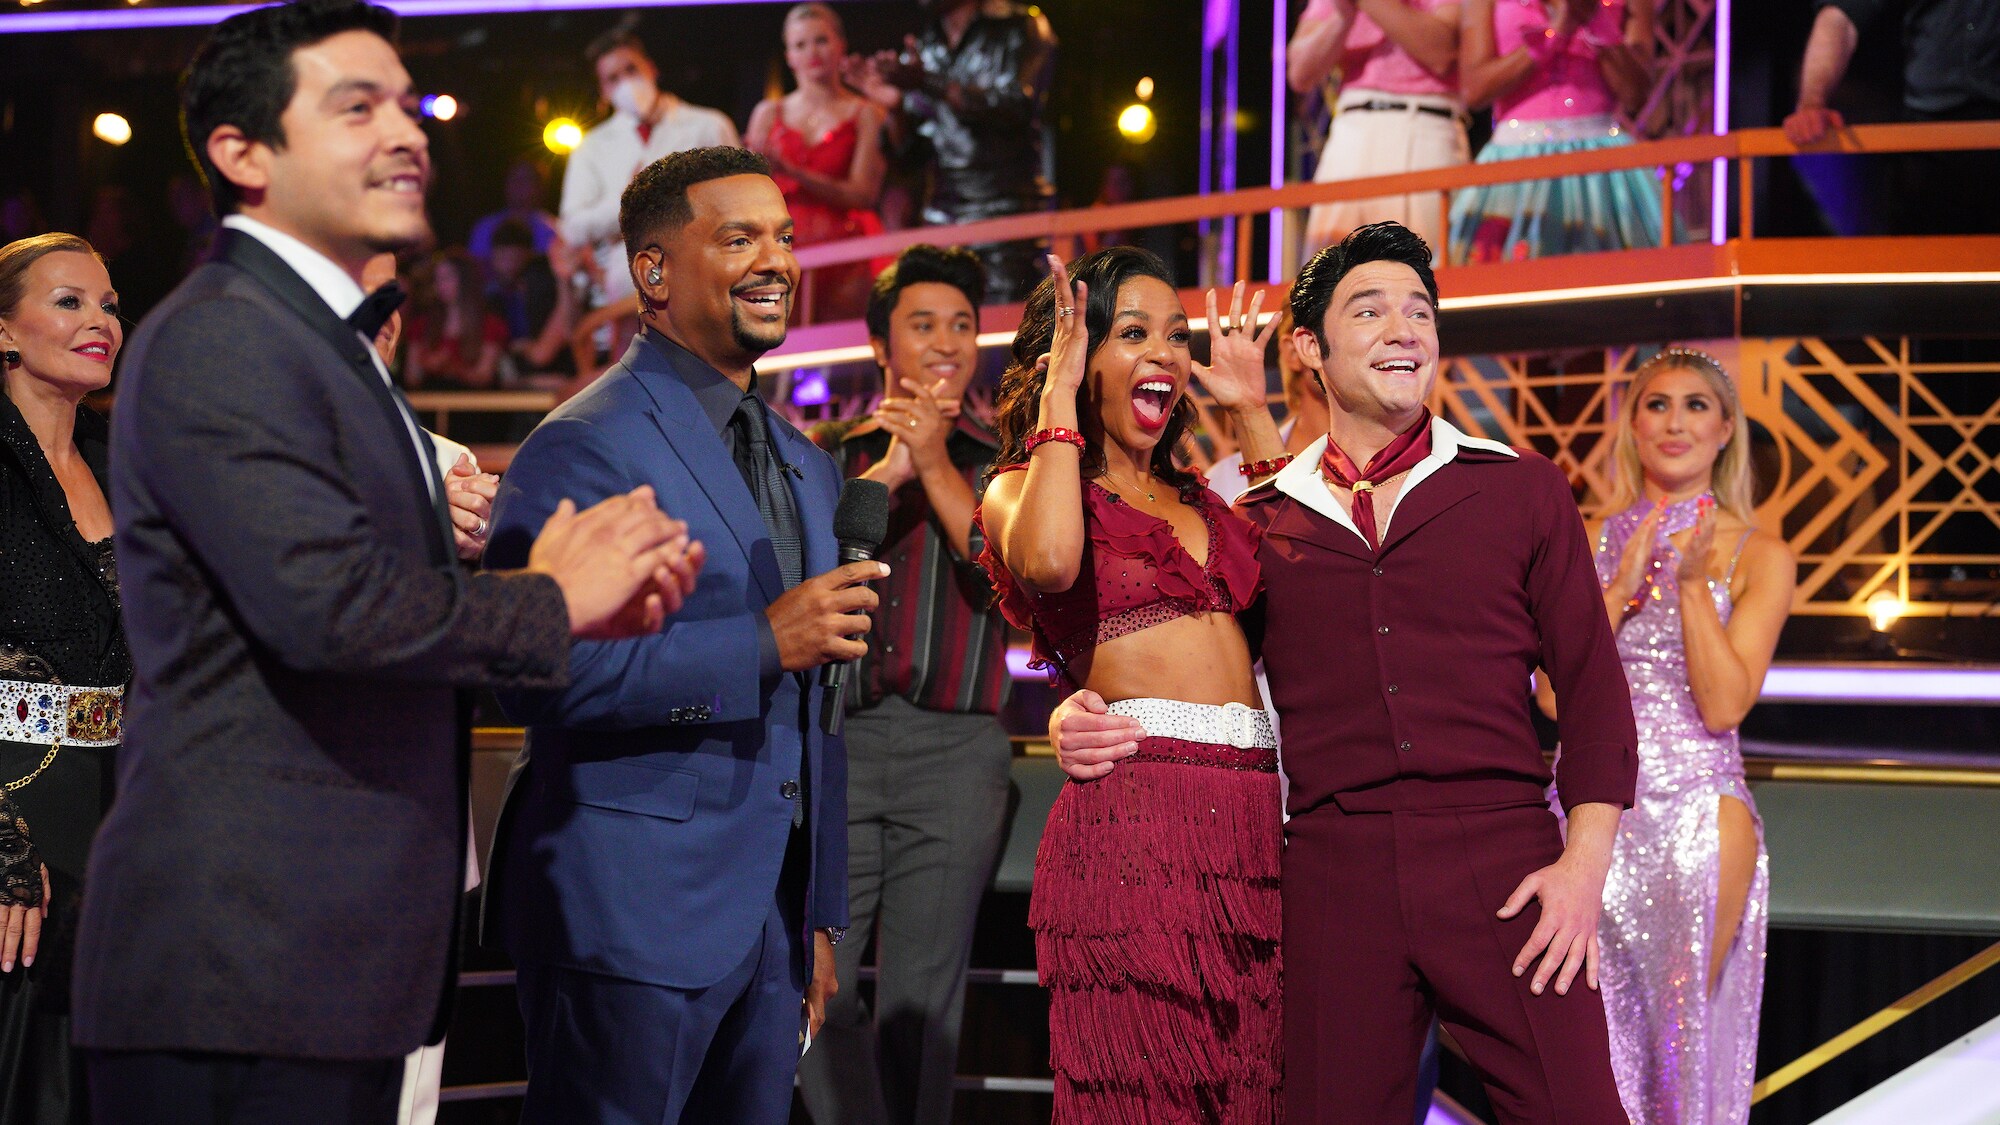 DANCING WITH THE STARS - “Elvis Night” –  The 15 remaining couples “Can’t Help Falling in Love” with Elvis this week as they take on all-new dance styles to music by The King of Rock ‘n’ Roll. Week two of the mirorrball competition will stream live MONDAY, SEPT. 26 (8:00pm ET / 5:00pm PT), on Disney+. (ABC/Christopher Willard) ALFONSO RIBEIRO, BRITT STEWART, DANIEL DURANT